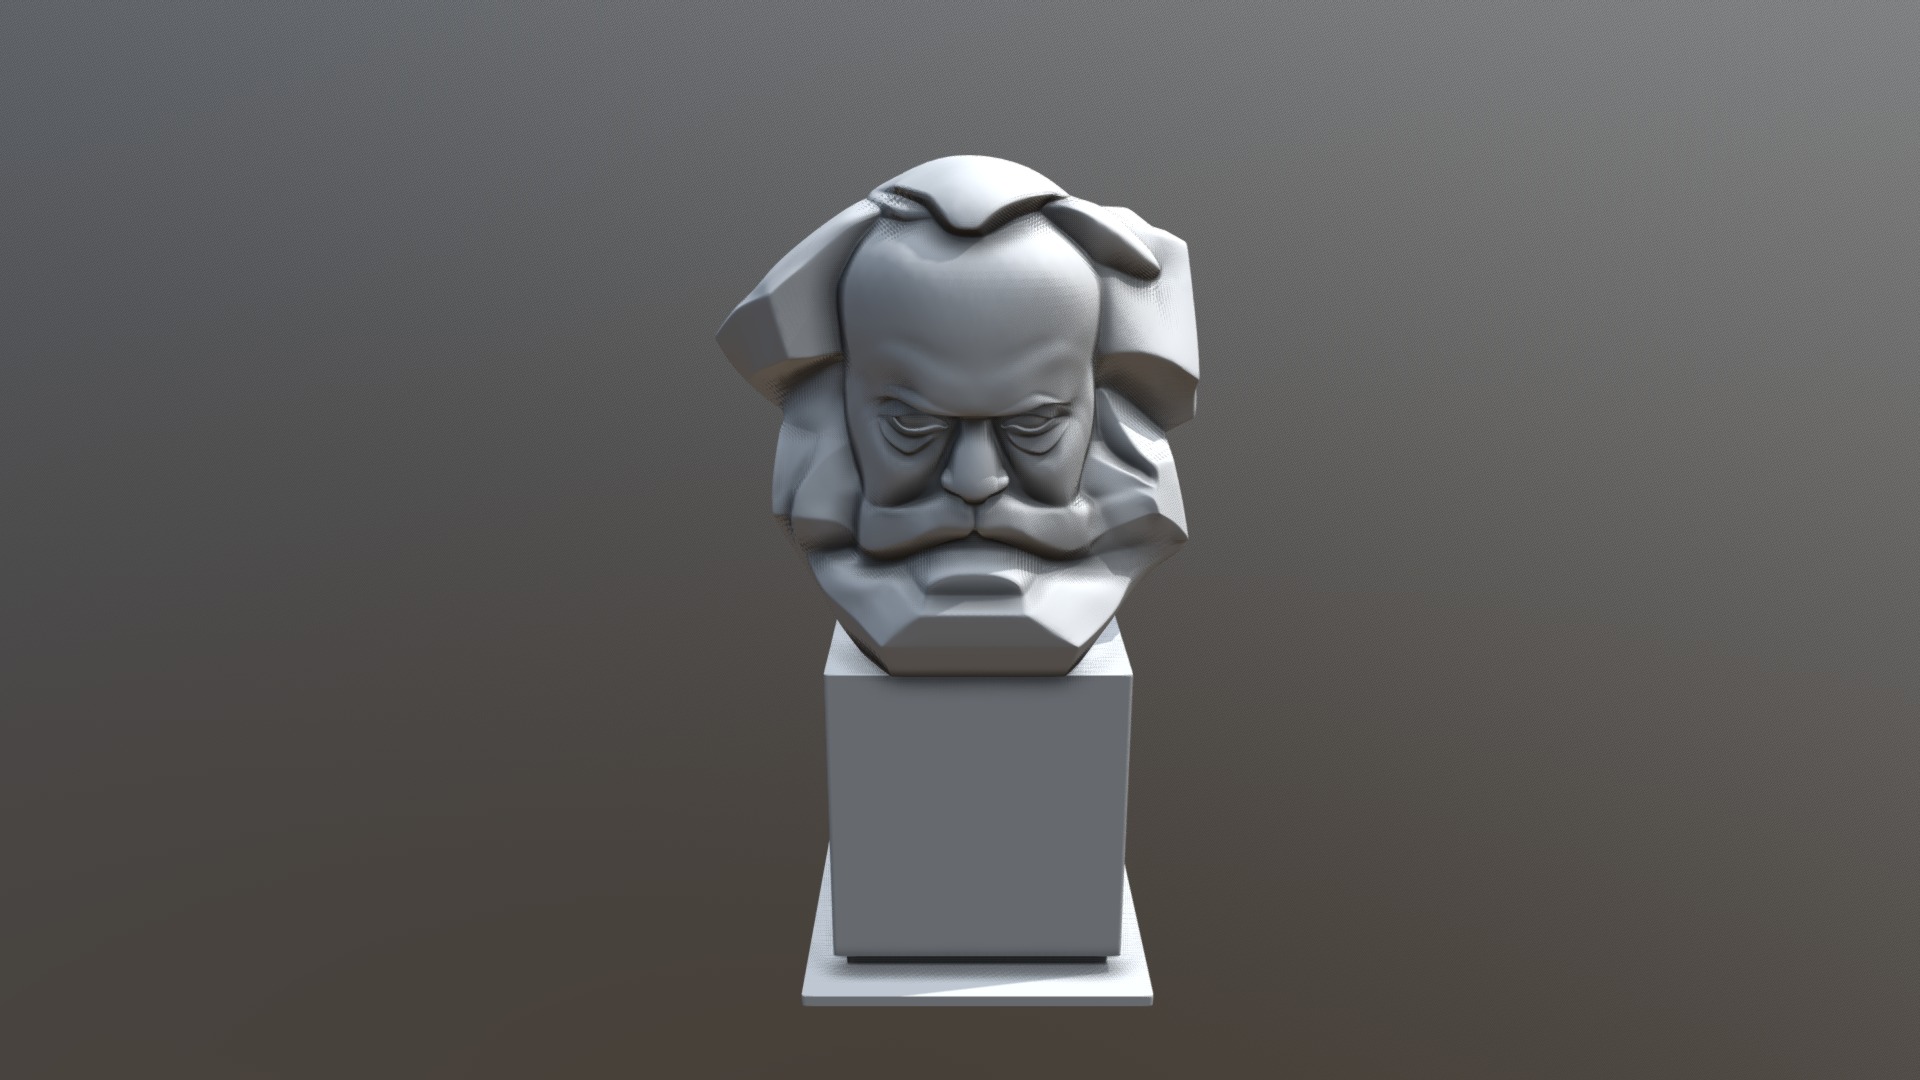 My interpretation of the Karl Marx Monument in Chemnitz. Modelled with blender according to the picture

If interested 
gumroad com / vandragon_de - Karl Marx Monument in Chemnitz - 3D model by vandragon_de 3d model